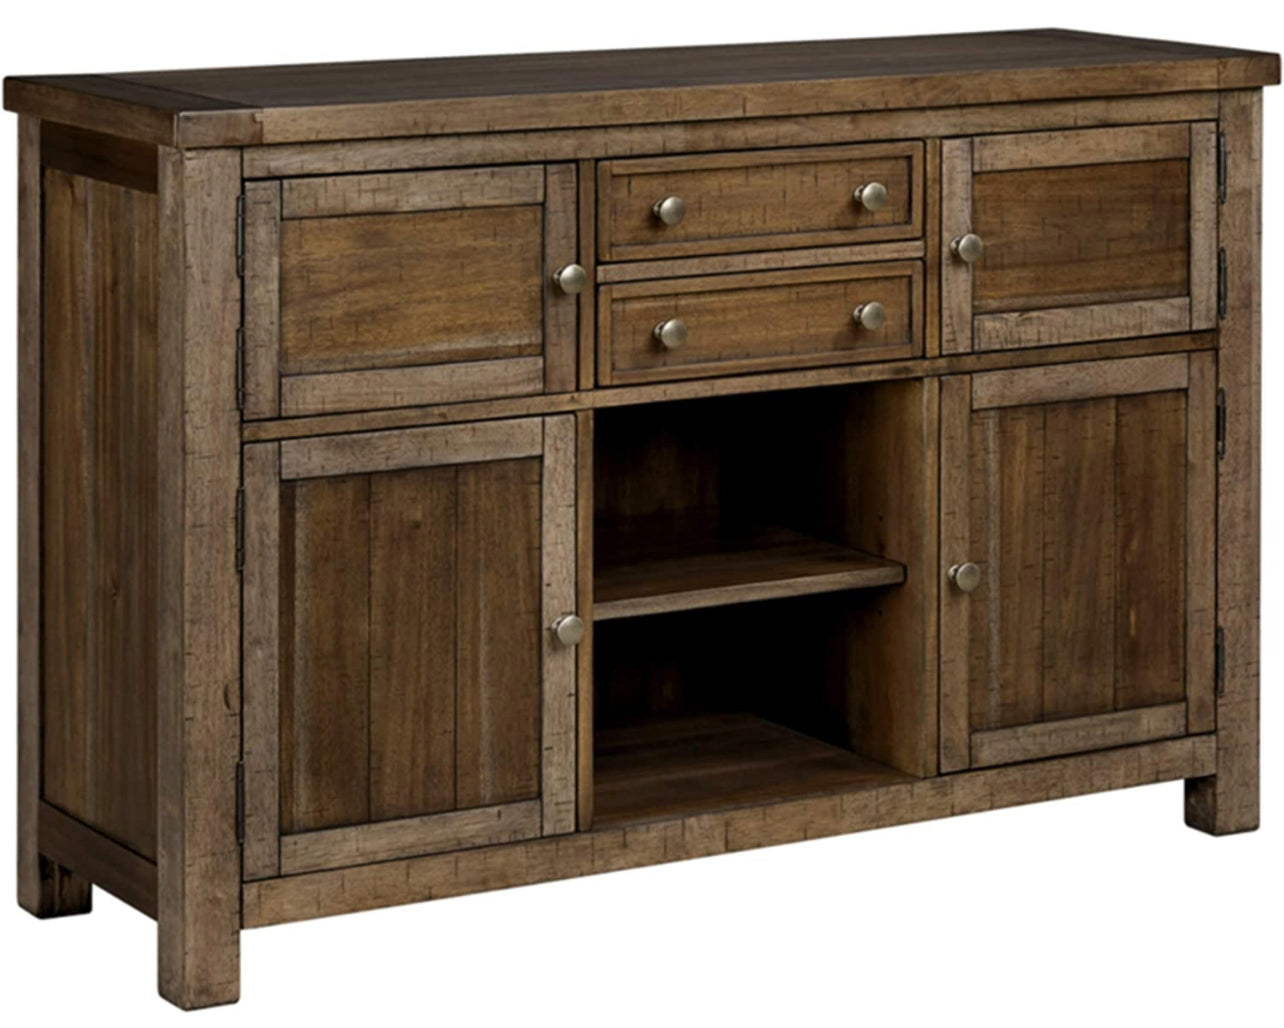 Signature Design by Ashley Moriville Rustic Dining Room Buffet, Brown - $525